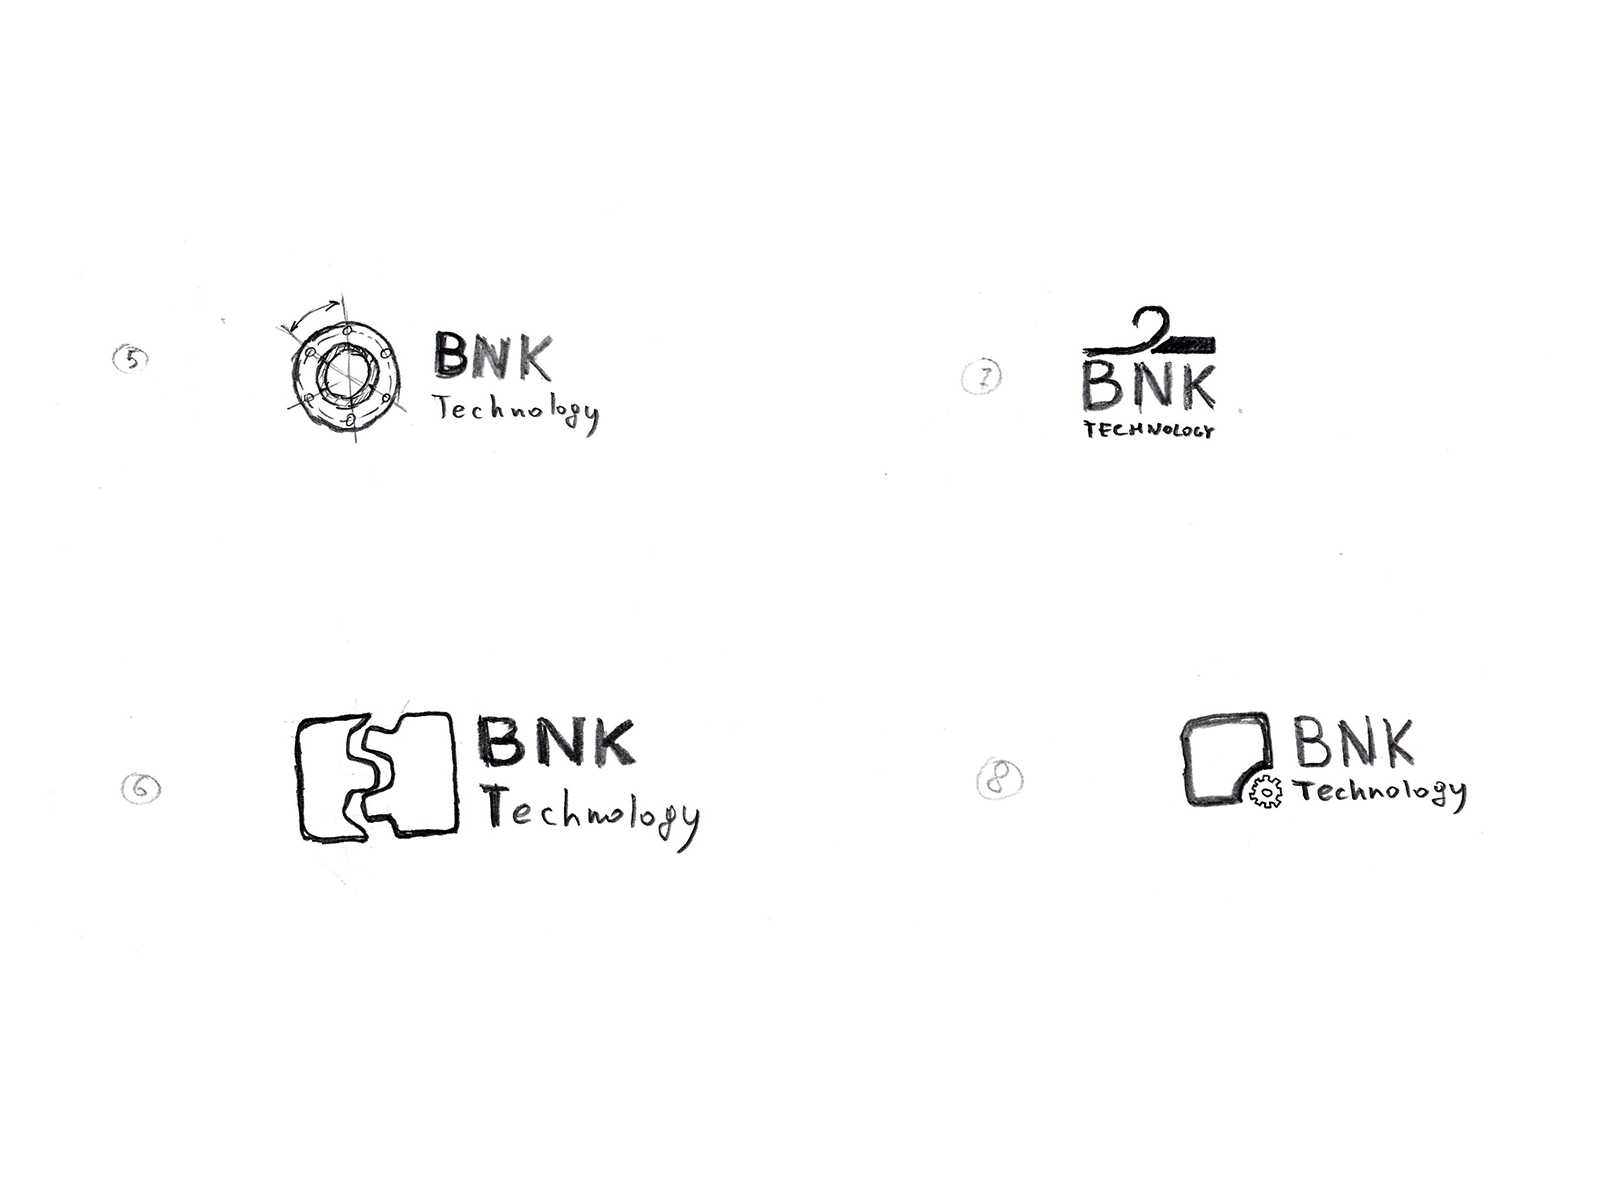 The logo of the modern metal processing company BNK Technology